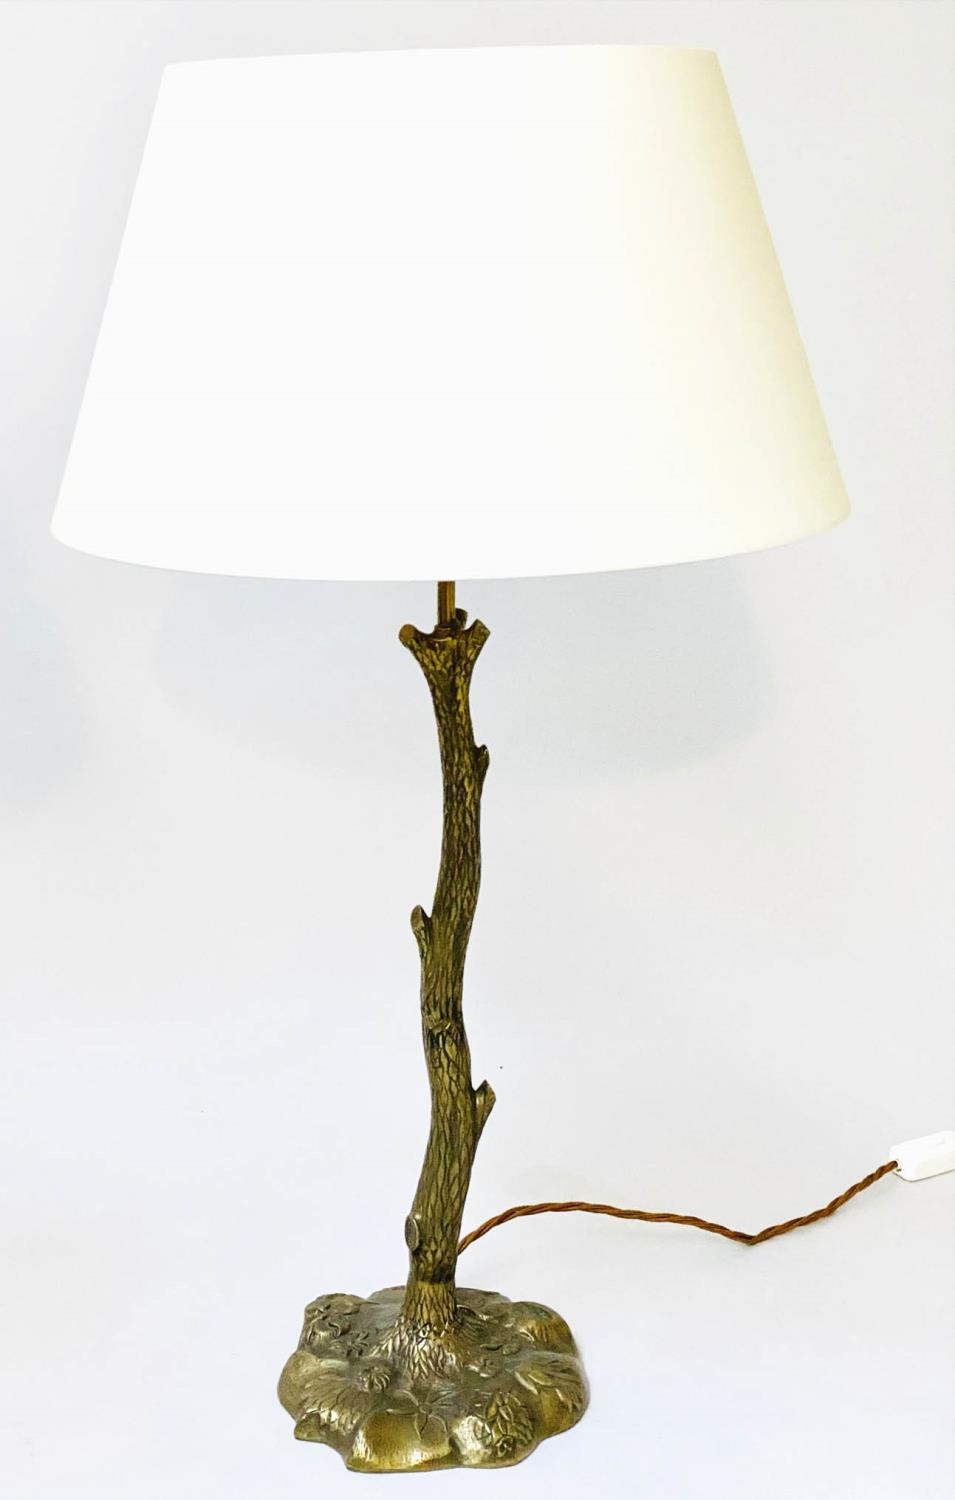 VAUGHAN TABLE LAMPS, a pair Truro twig table lamps in bronze with shades, 77cm H. (2) - Image 4 of 8